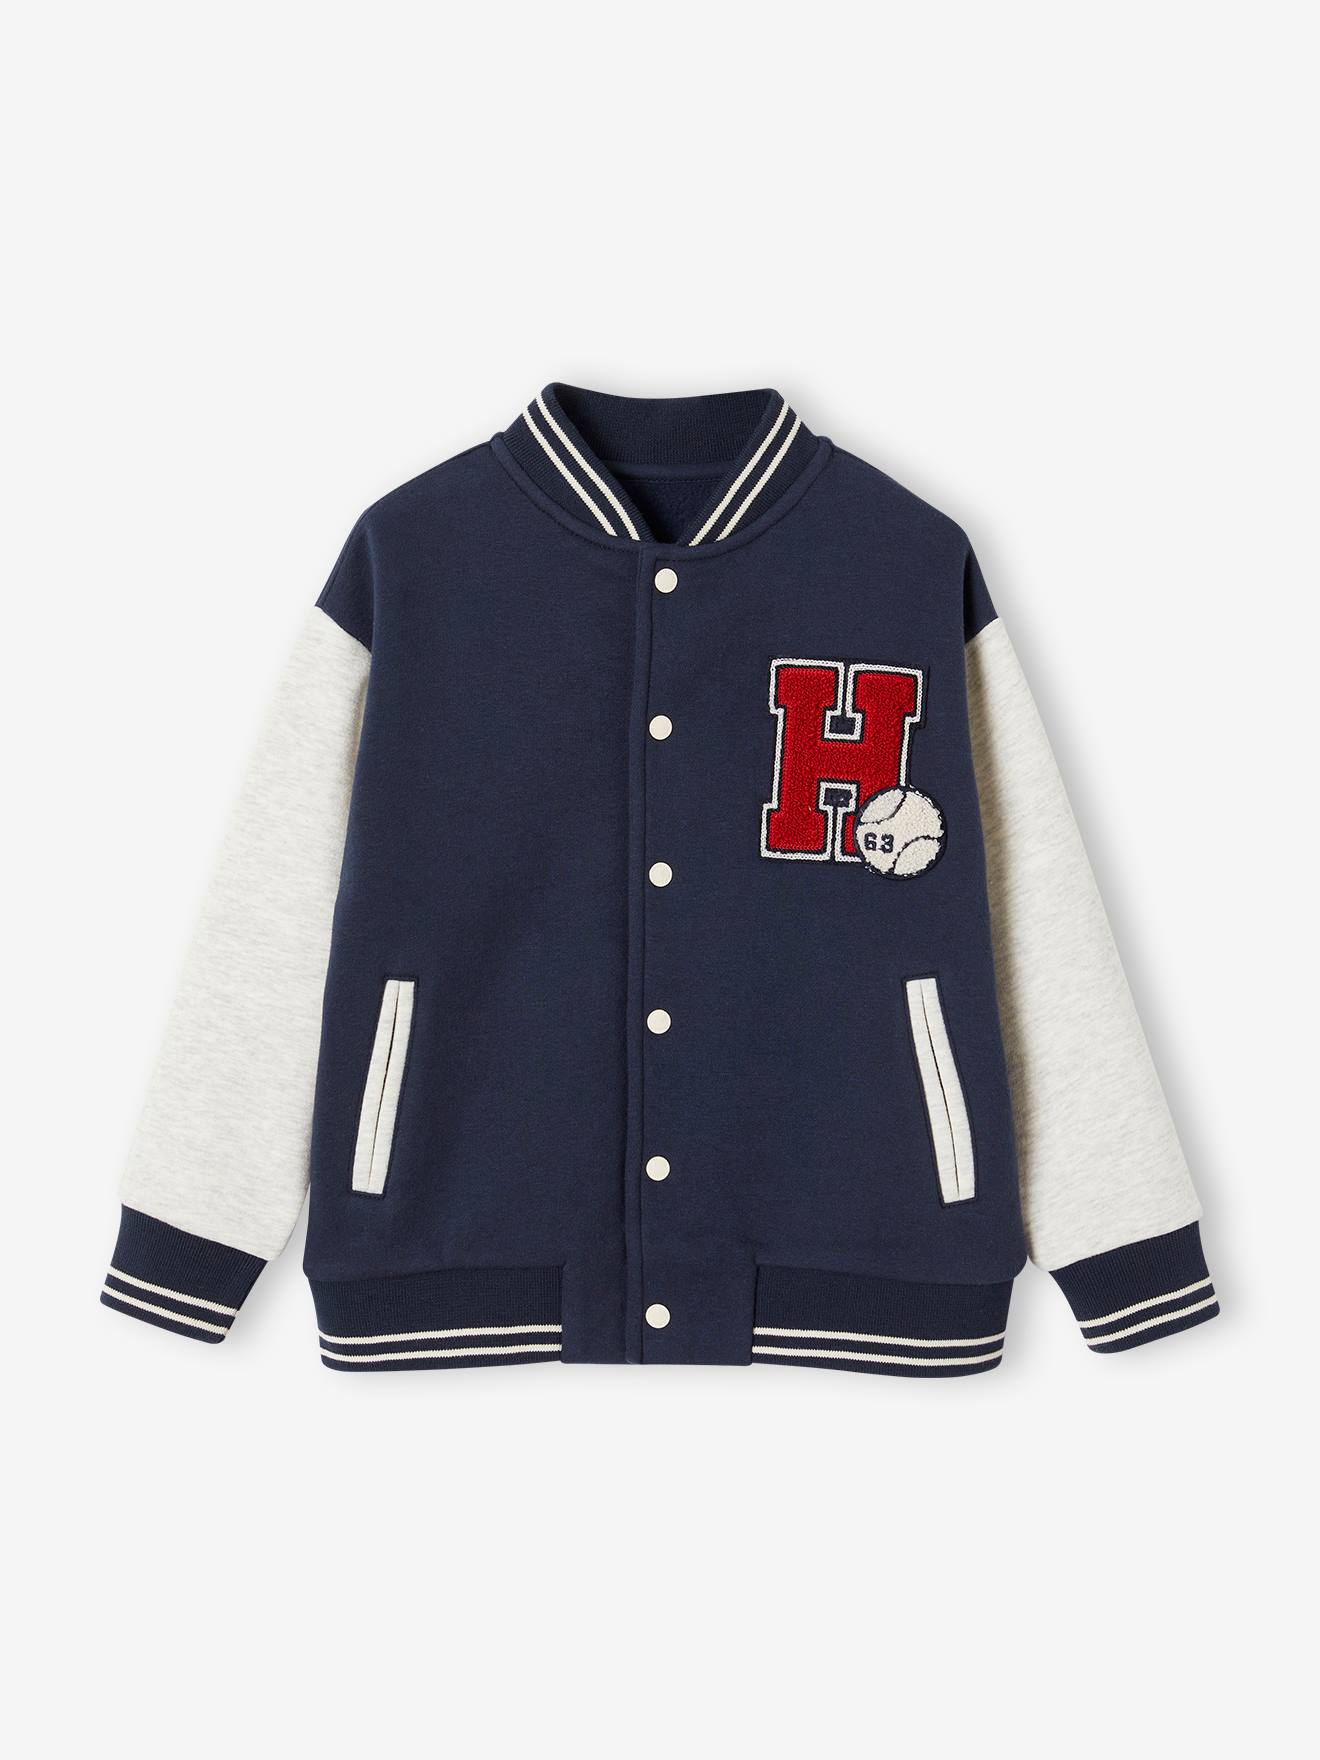 College-Type Jacket in Fleece, Patch in Boucle Knit, for Boys navy blue